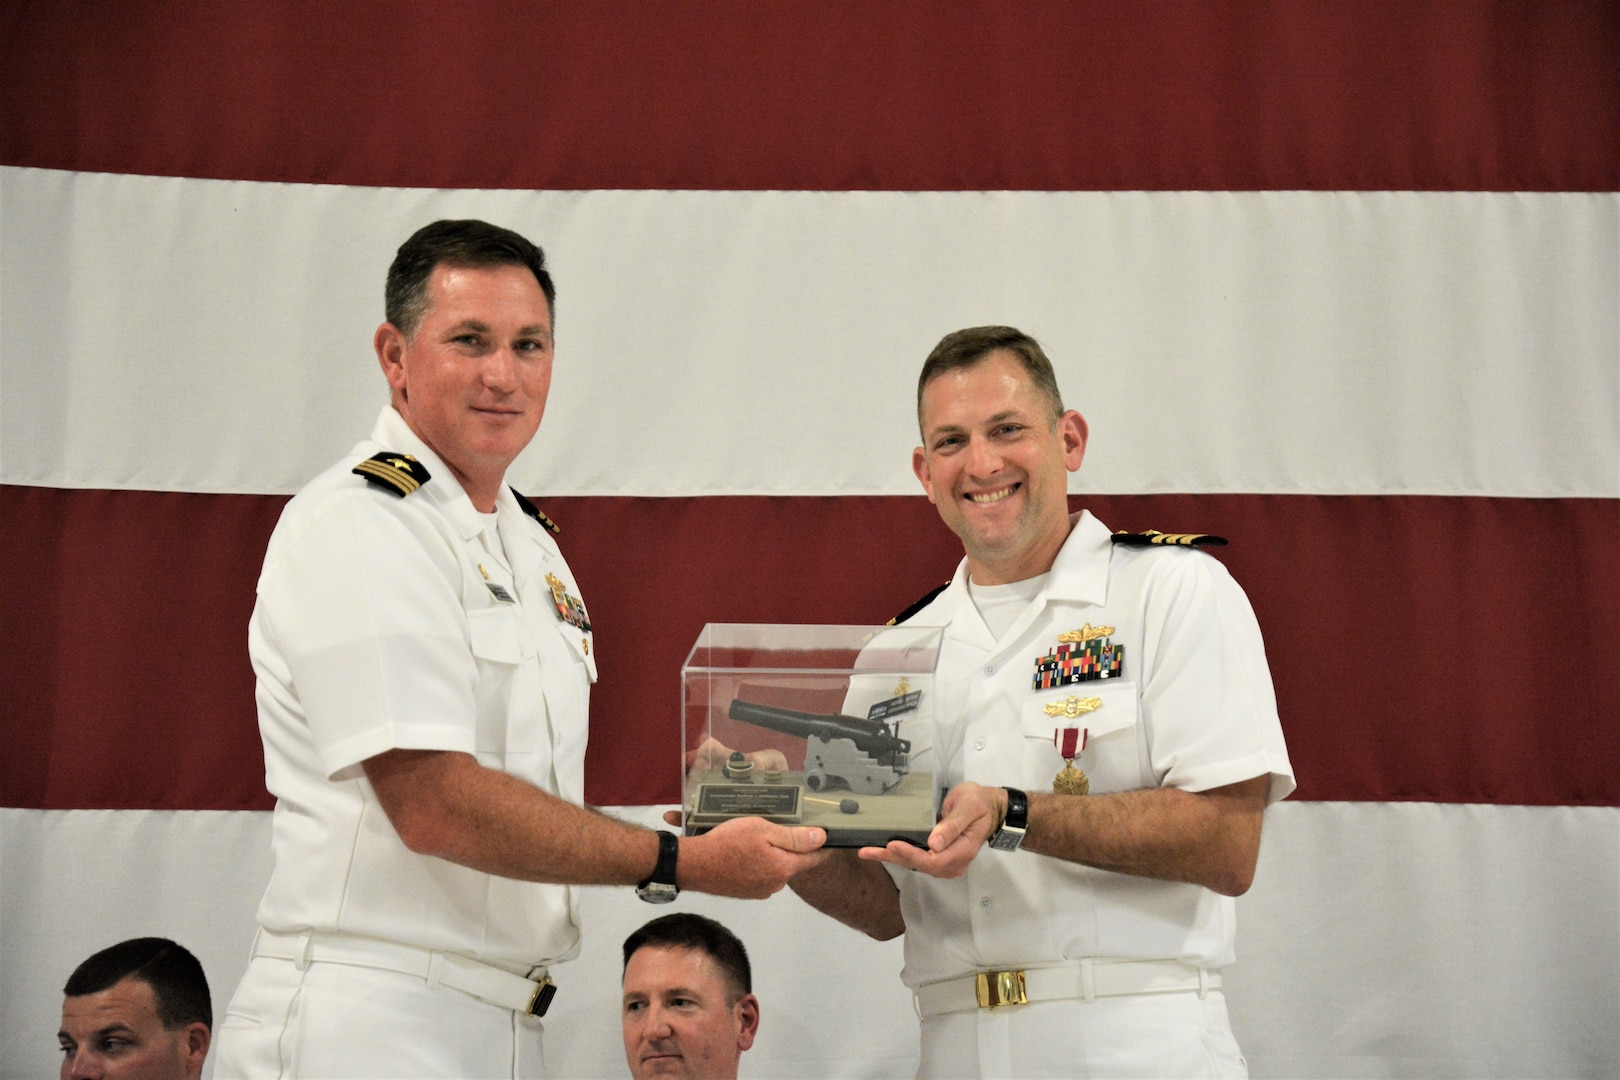 IMAGE: (Left to right) Cmdr. Casey Plew, Commanding Officer, Naval Surface Warfare Center Dahlgren Division (NSWCDD), presents Cmdr. Andrew Hoffman with a farewell “token” for his 40 months as NSWCDD Dam Neck Activity’s commanding officer. More than 200 Sailors and guests attended a traditional Change of Command ceremony at Naval Air Station (NAS) Oceana’s Center for Naval Aviation Technical Training Unit’s ceremonial hangar aboard NAS Oceana June 27 where Hoffman was relieved of command by Cmdr. Joseph Oravec. Oravec became the command’s 28th commanding officer.